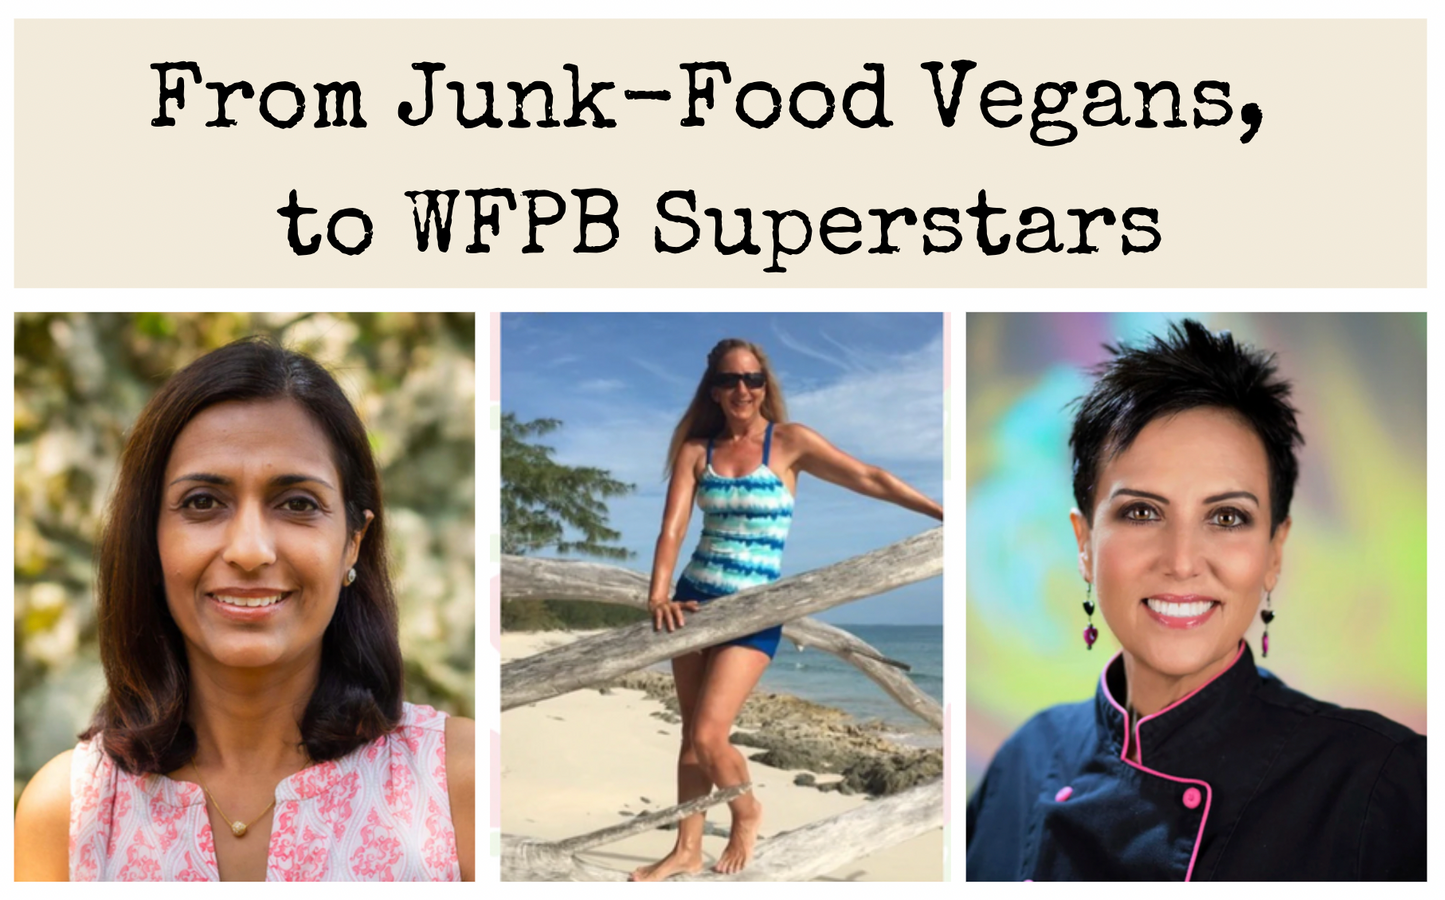 Is Vegan Food Healthy? Here's What Happened When They Started Eating WFPB Instead